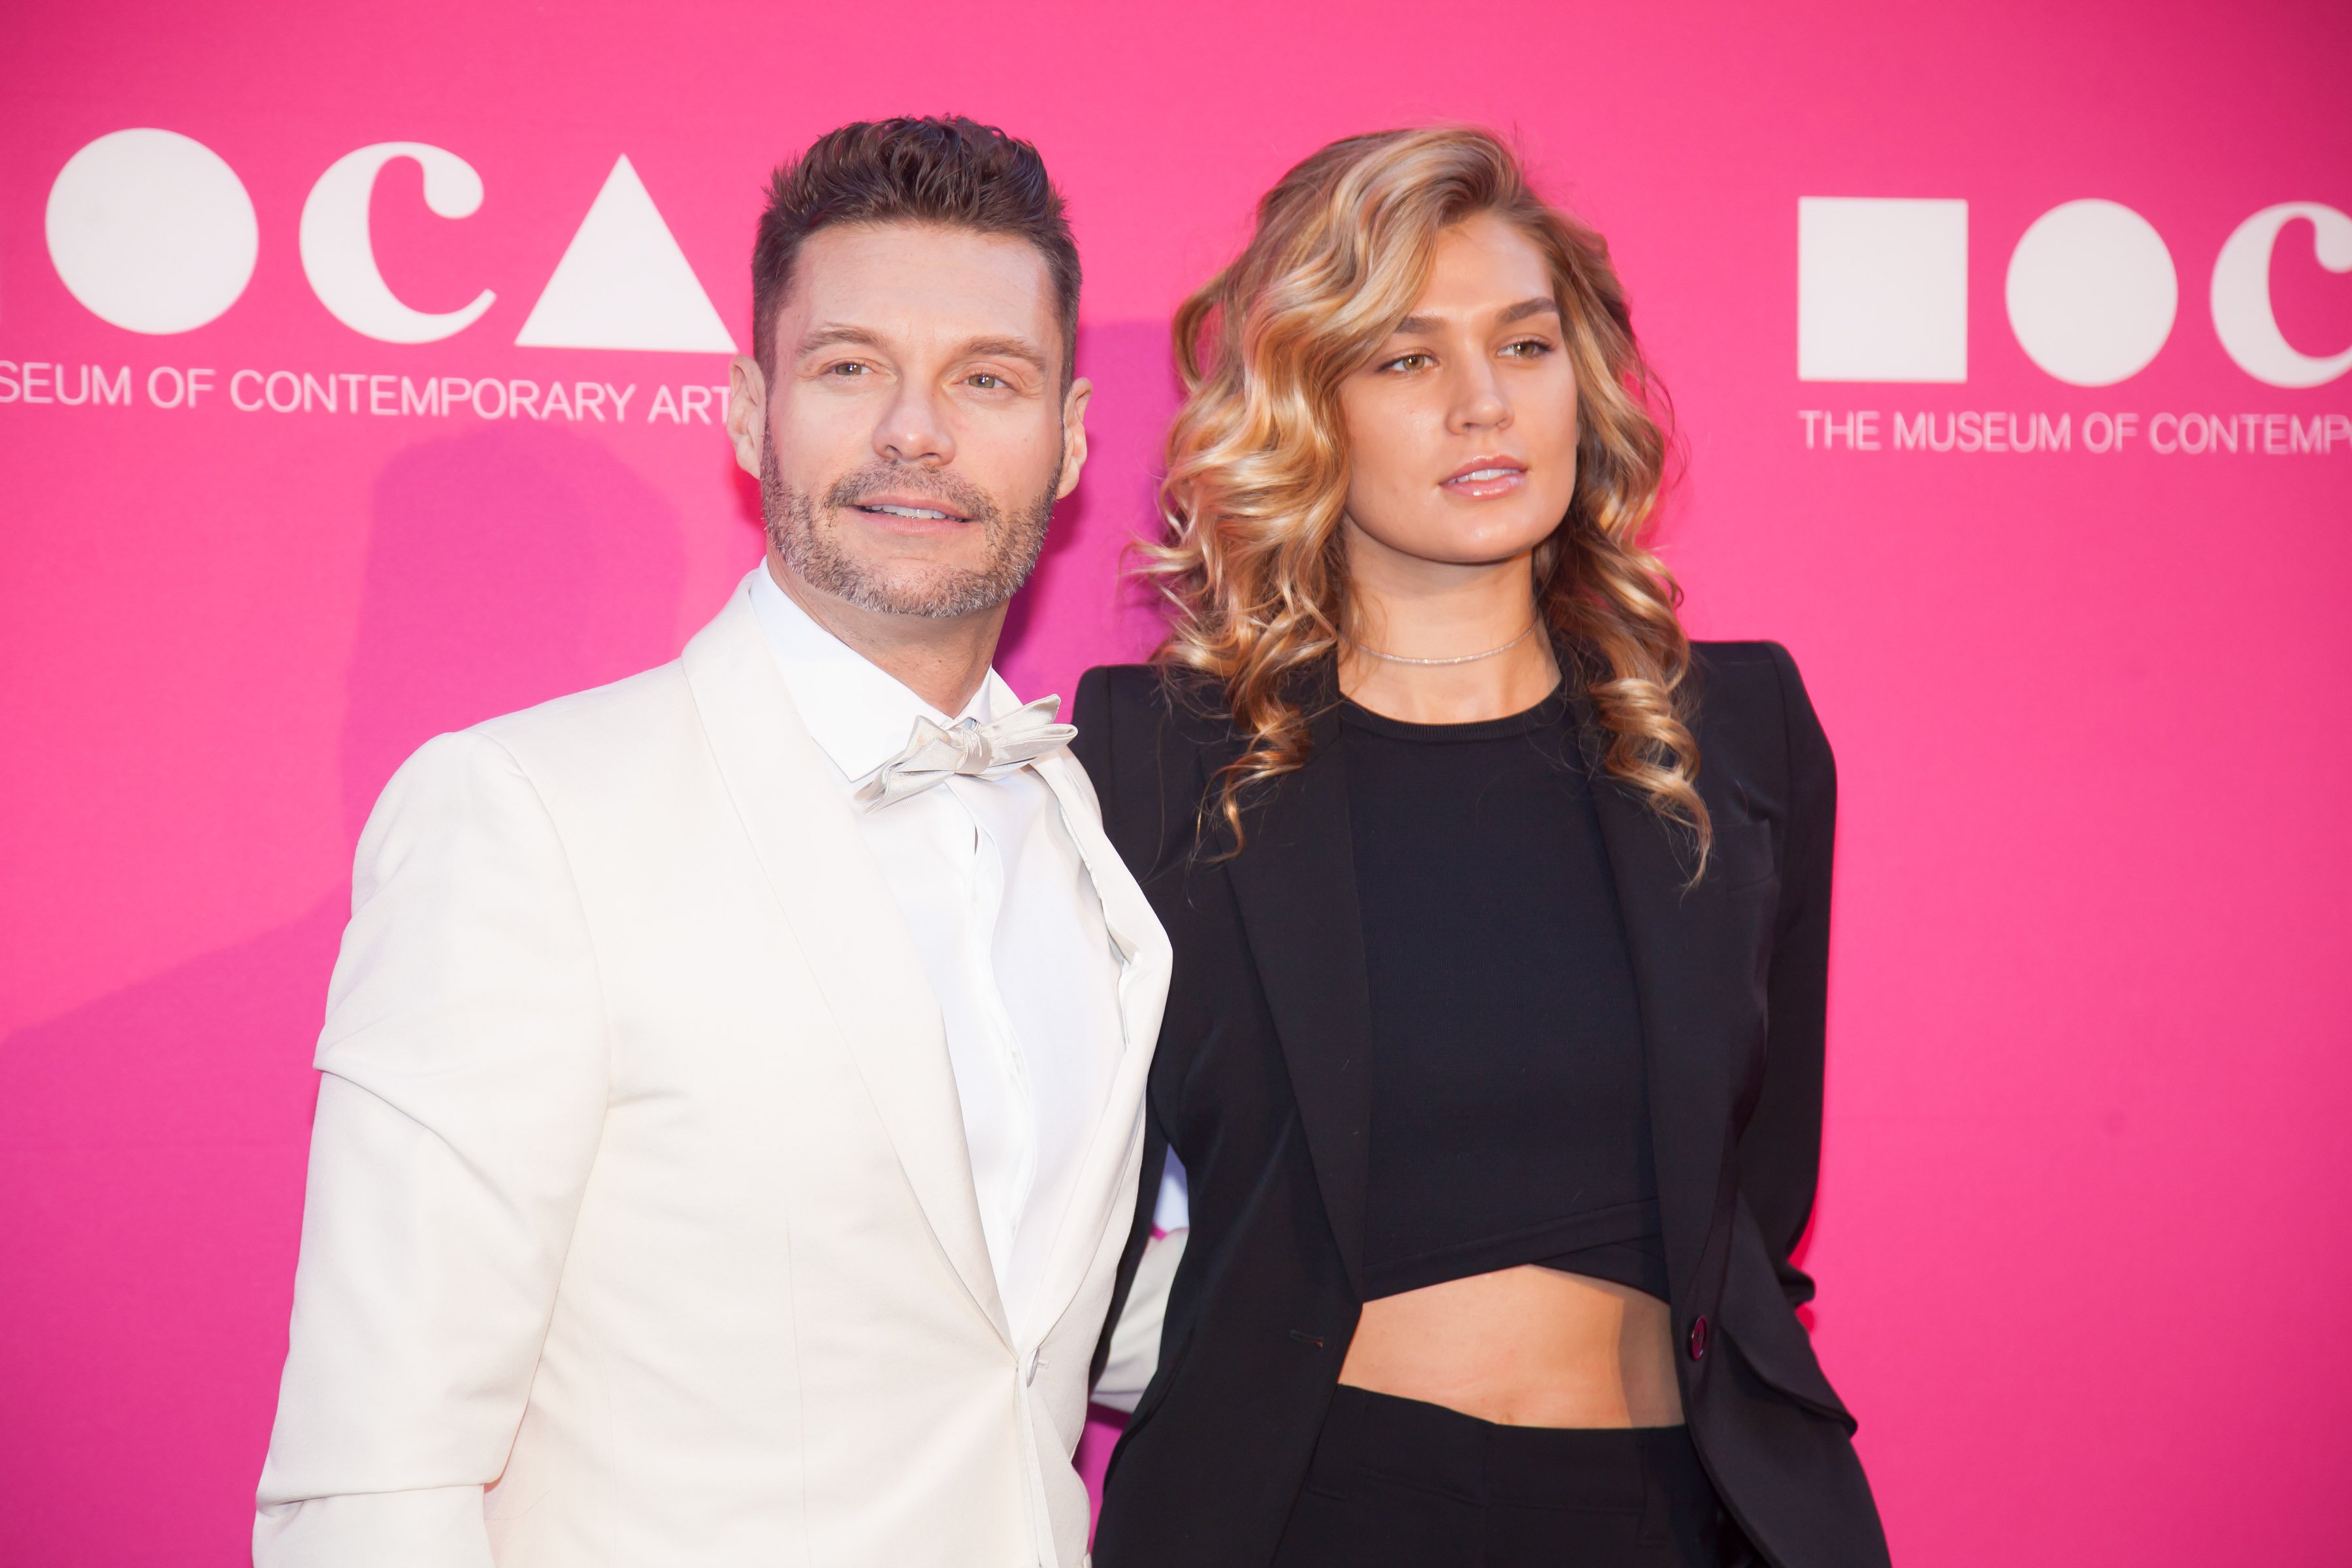 Ryan Seacrest and Shayna Taylor attend The Museum of Contemporary Art, Los Angeles Annual Gala at The Geffen Contemporary at MOCA on April 29, 2017 in Los Angeles, California. | Source: Getty Images